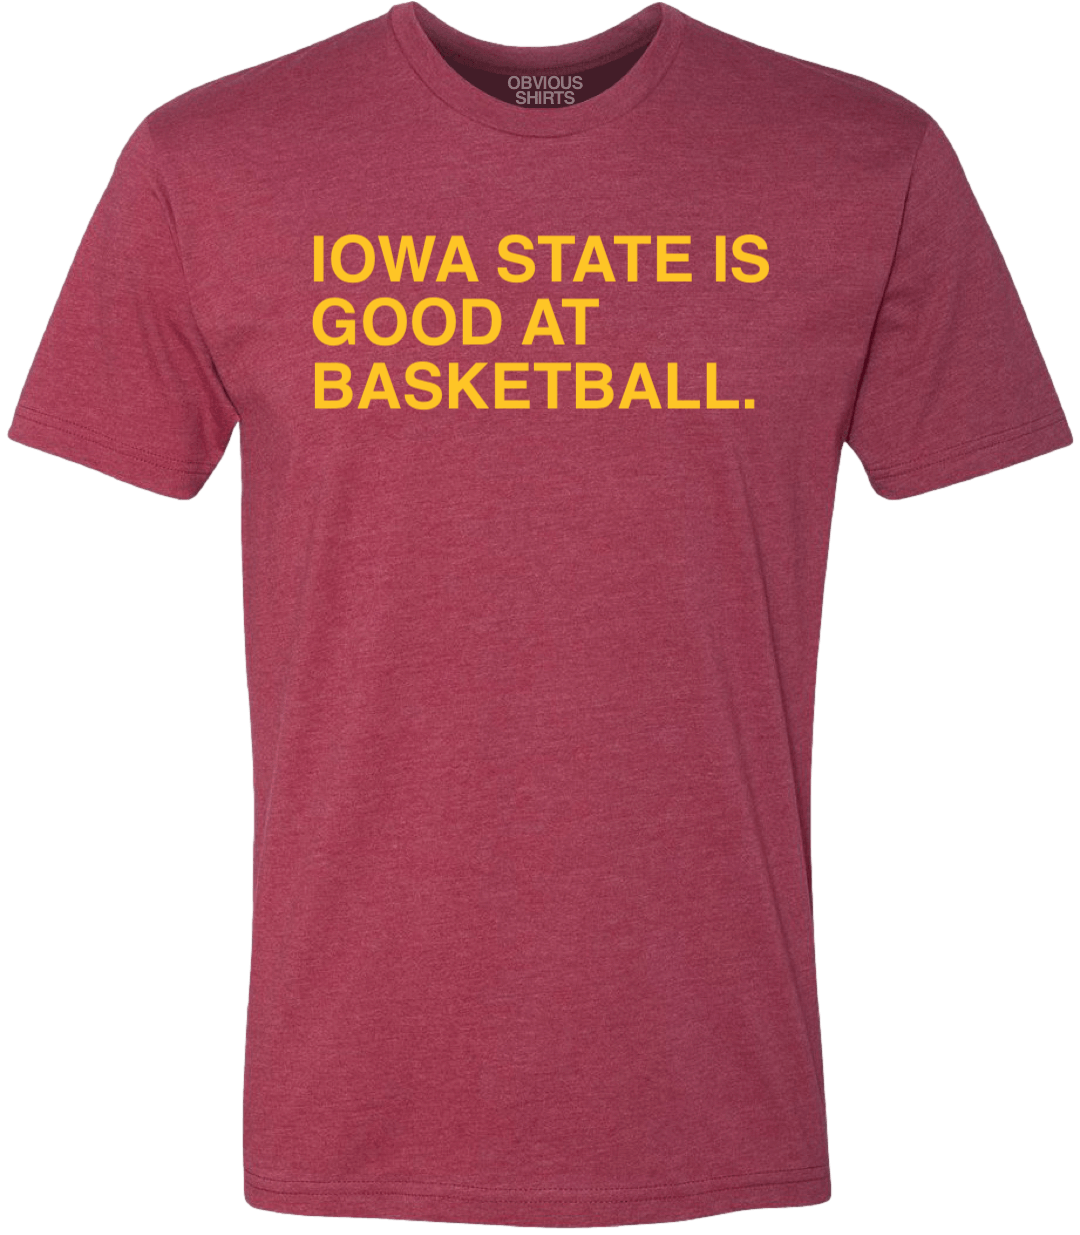 IOWA STATE IS GOOD AT BASKETBALL. - OBVIOUS SHIRTS